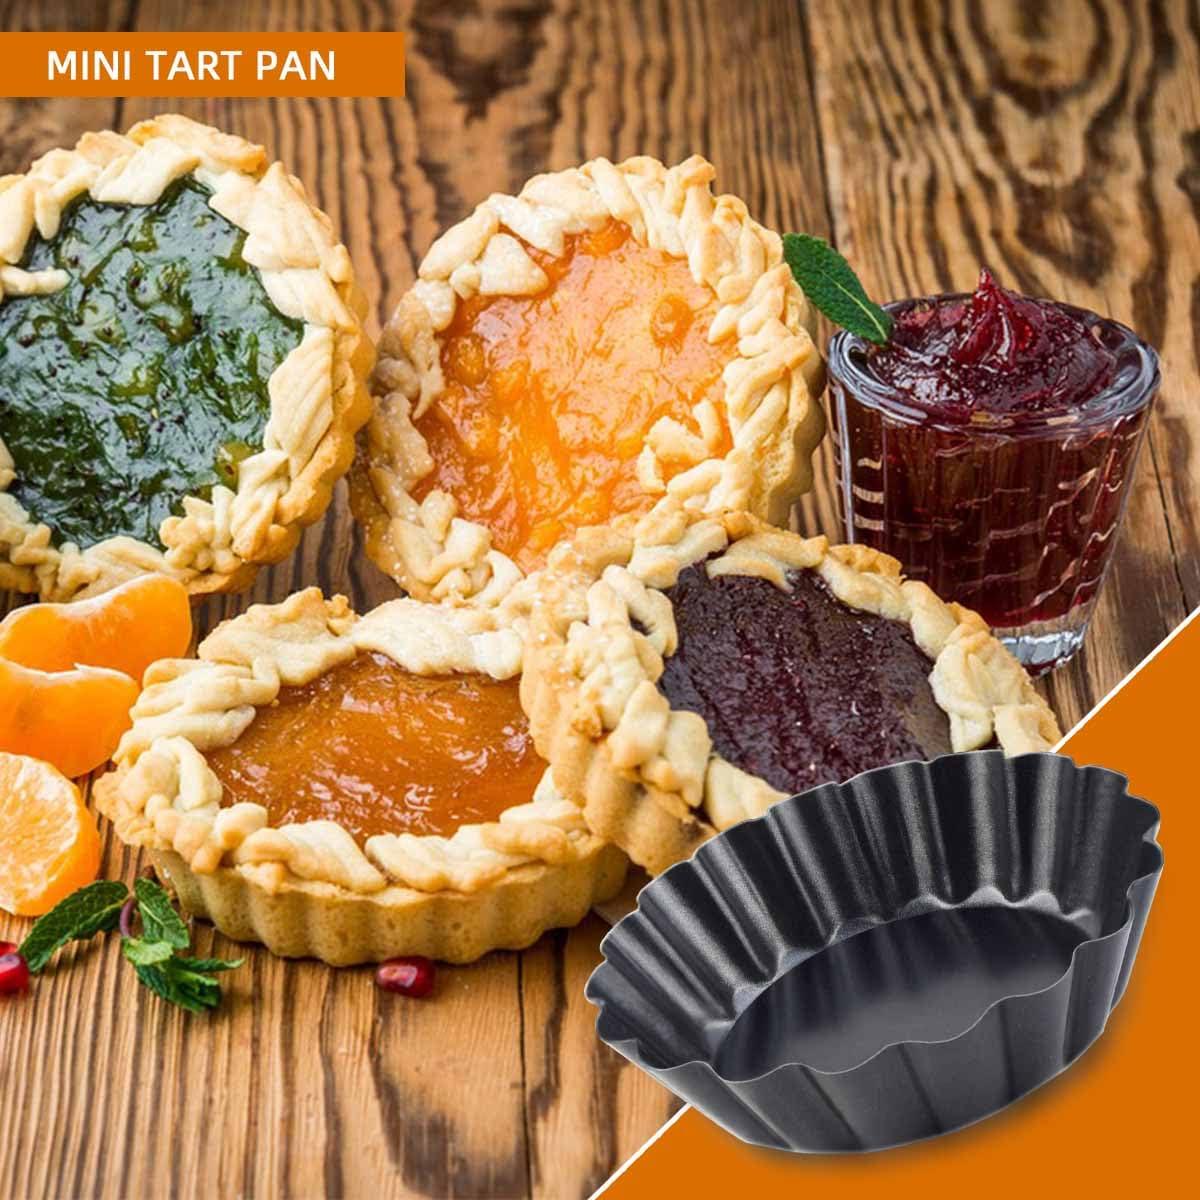 4 Pack Tart Pans Tortilla Pan Set Mini Tart Molds Carbon Steel Taco Shell for Baking 3 Inch Taco Salad Bowl Maker with Removable Bottom NonStick Tortilla Bowl Fluted Side for Quiche Cakes Pies (Black) - CookCave